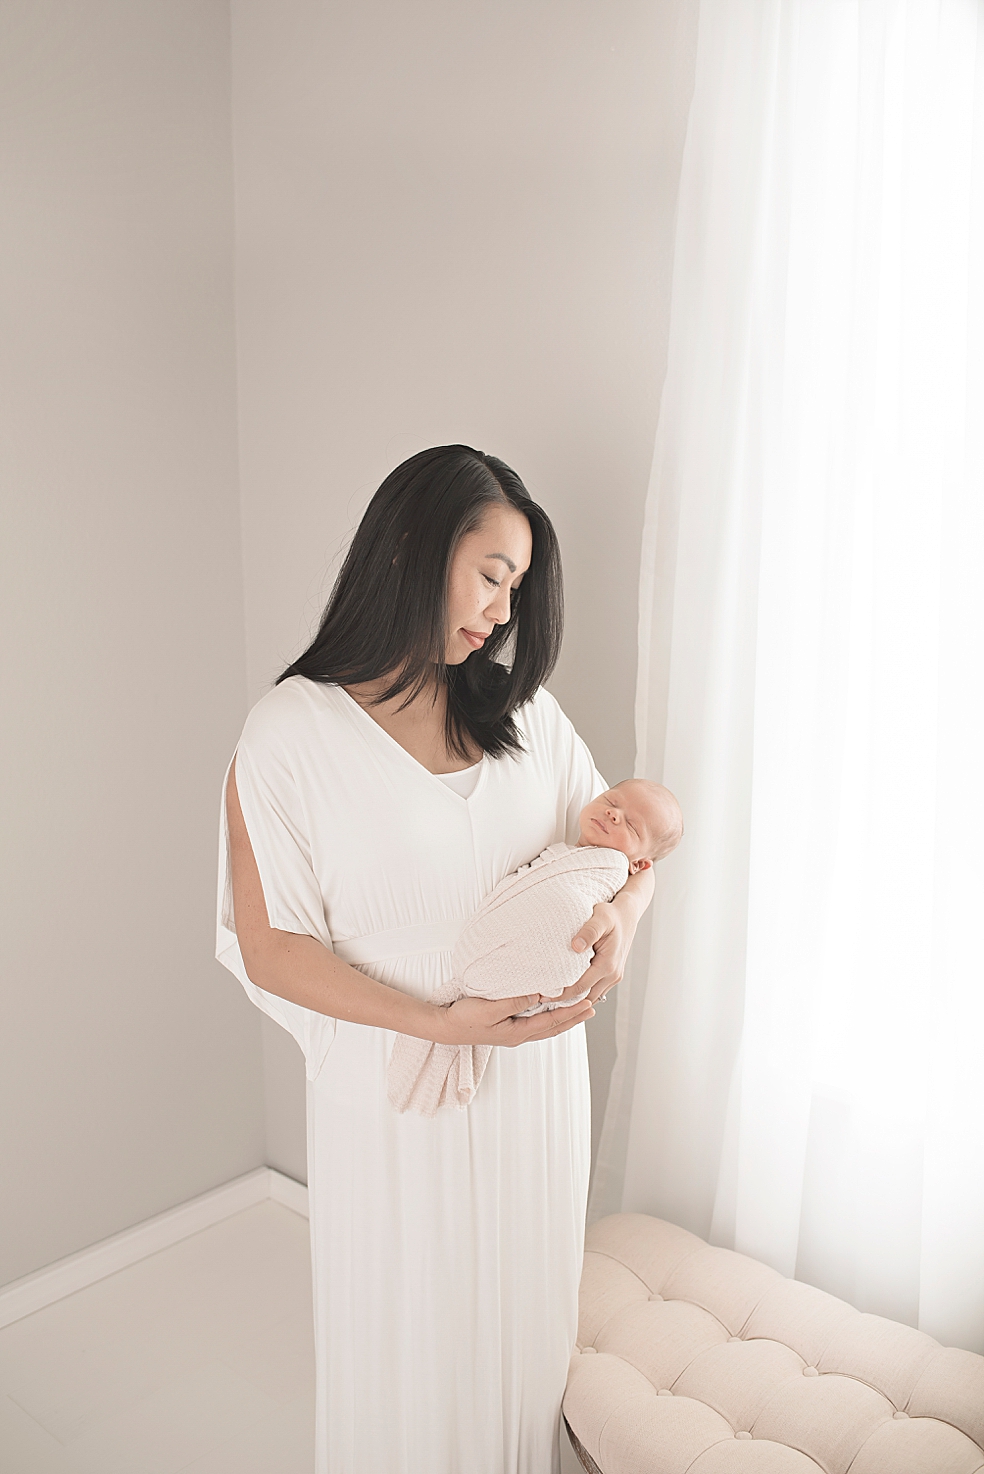 Mom in a long white dress holding her baby | Photo by Jessica Lee Photography